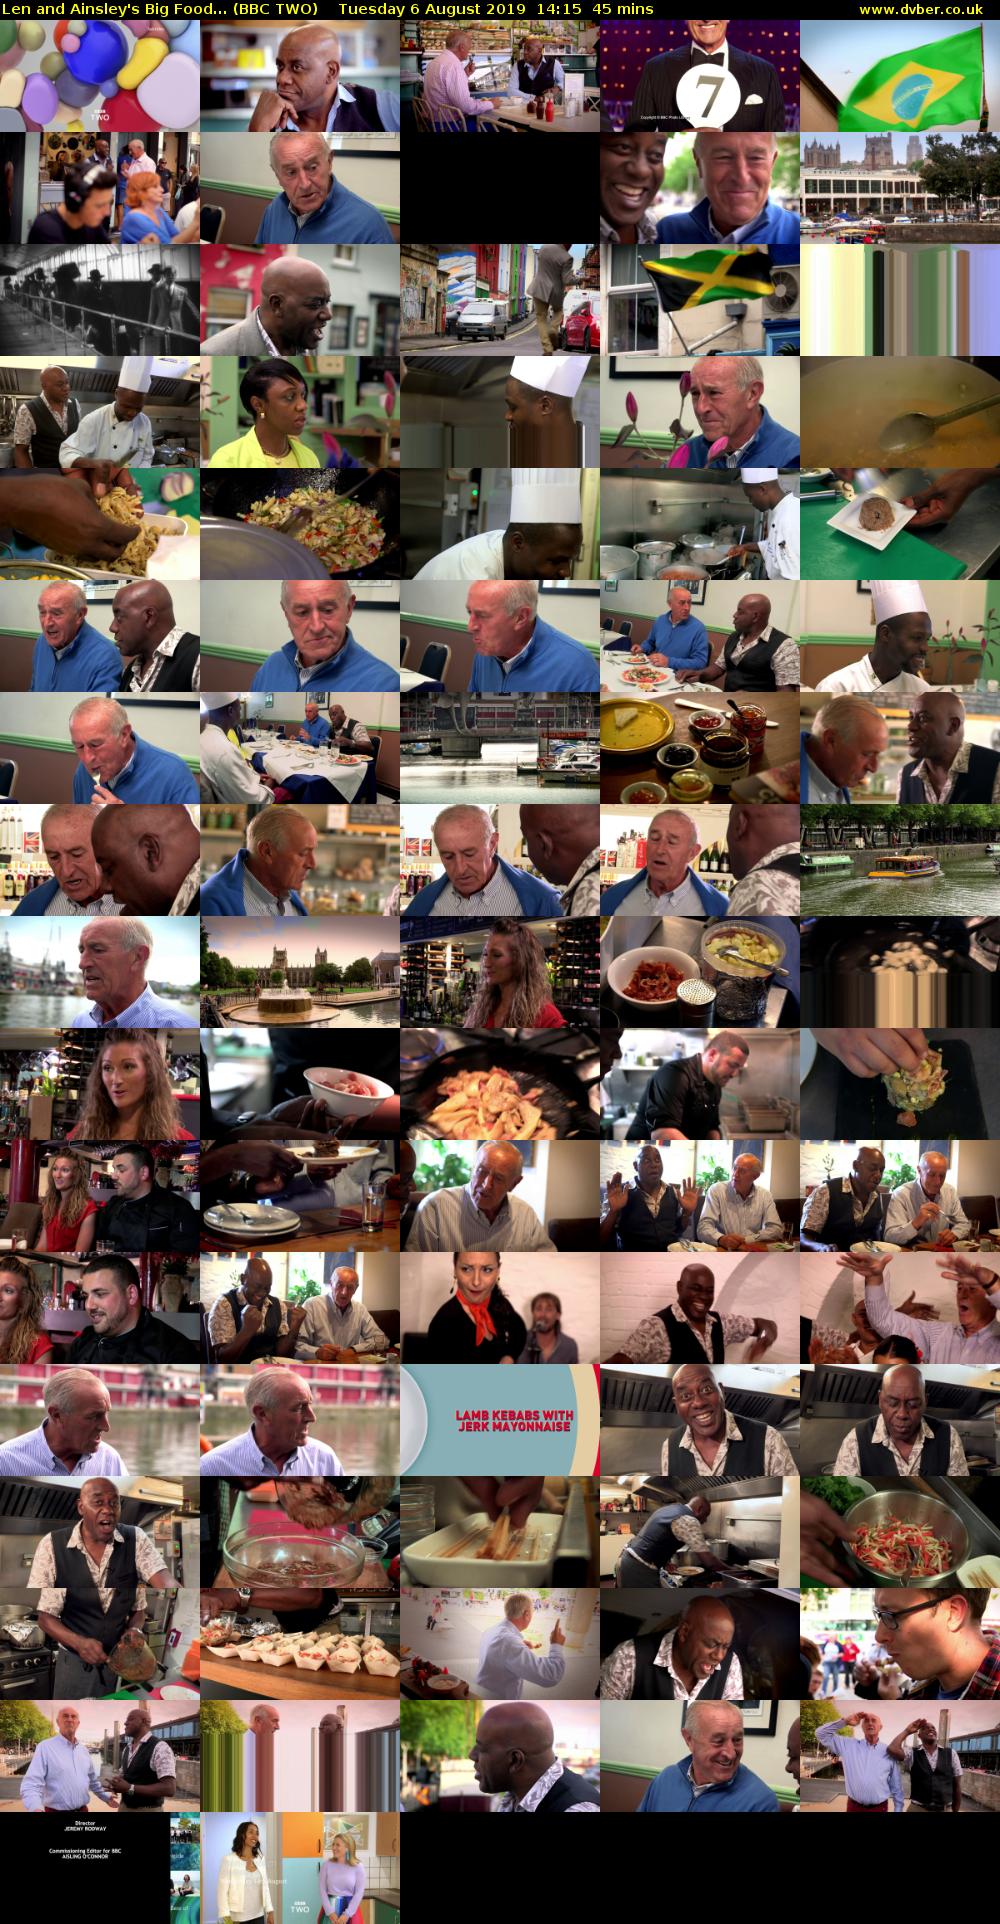 Len and Ainsley's Big Food... (BBC TWO) Tuesday 6 August 2019 14:15 - 15:00